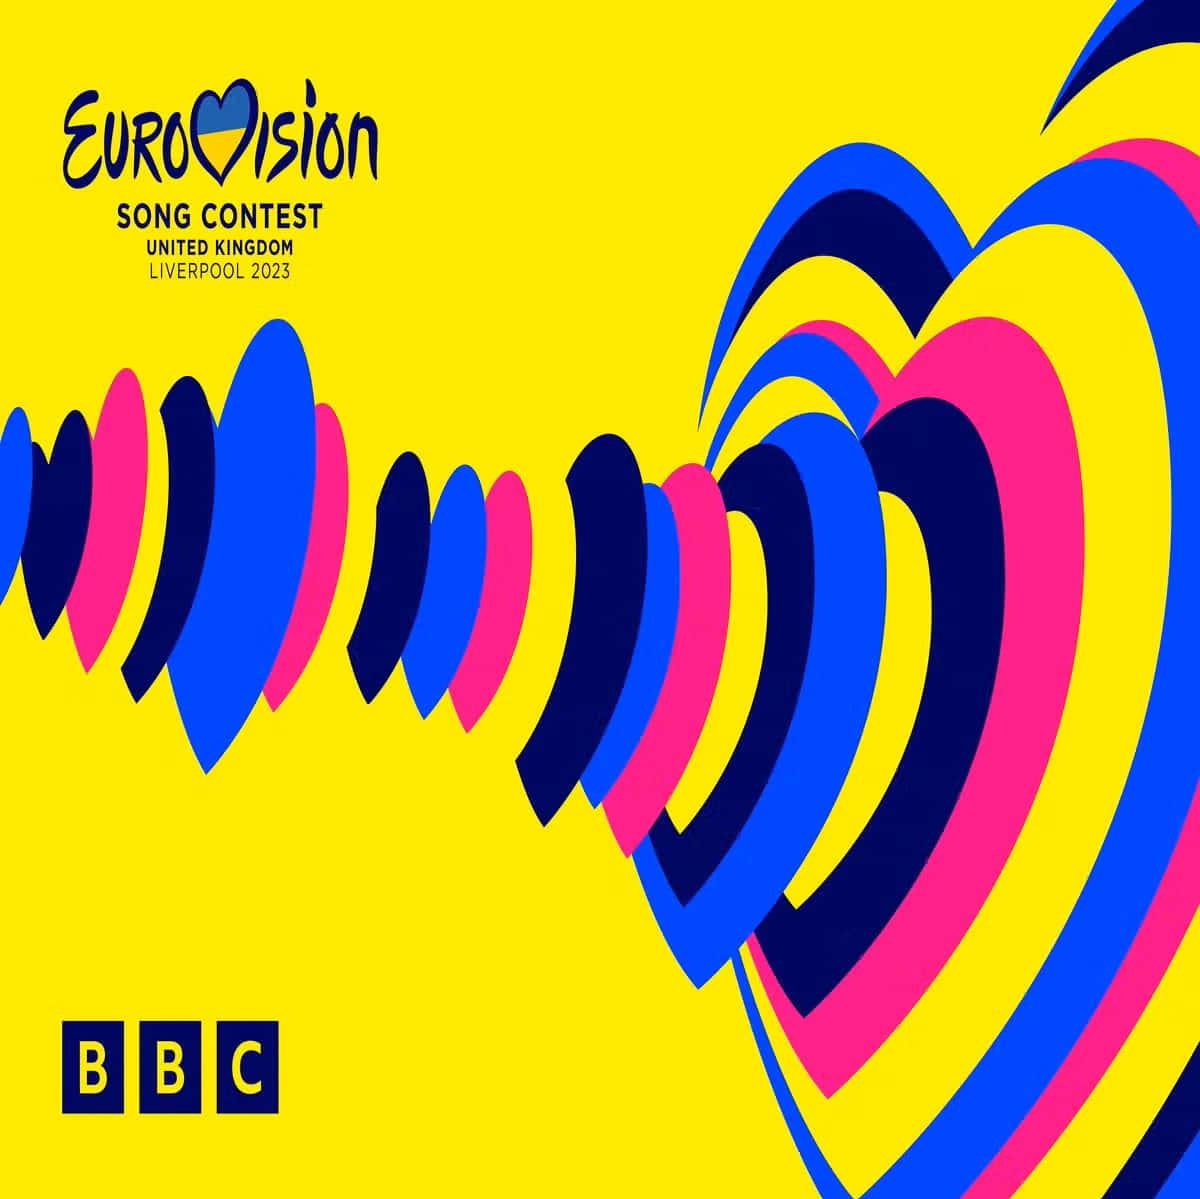 Image Get Ready For Eurovision Wallpaper